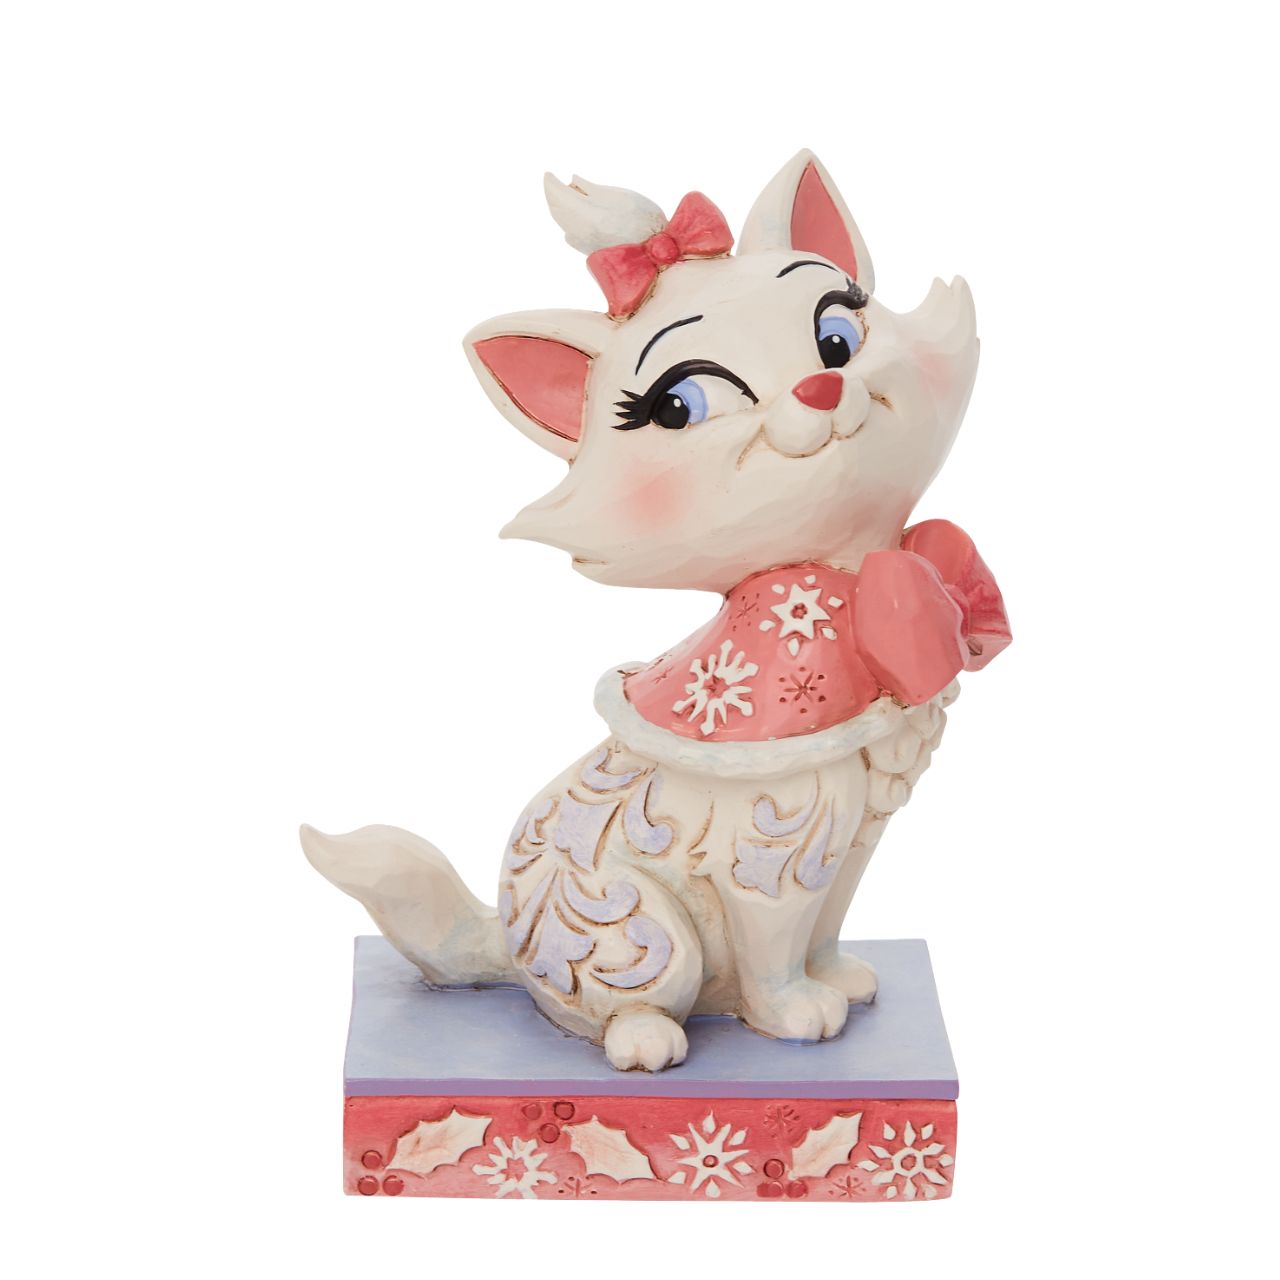 Jim Shore Marie Christmas Figurine  Marie is the princess of the Aristocats family. Looking lavish in her bows, she wears a pink cape fitted in snowflakes. Delicate Jim Shore blue rosemaling runs down her lovely coat.